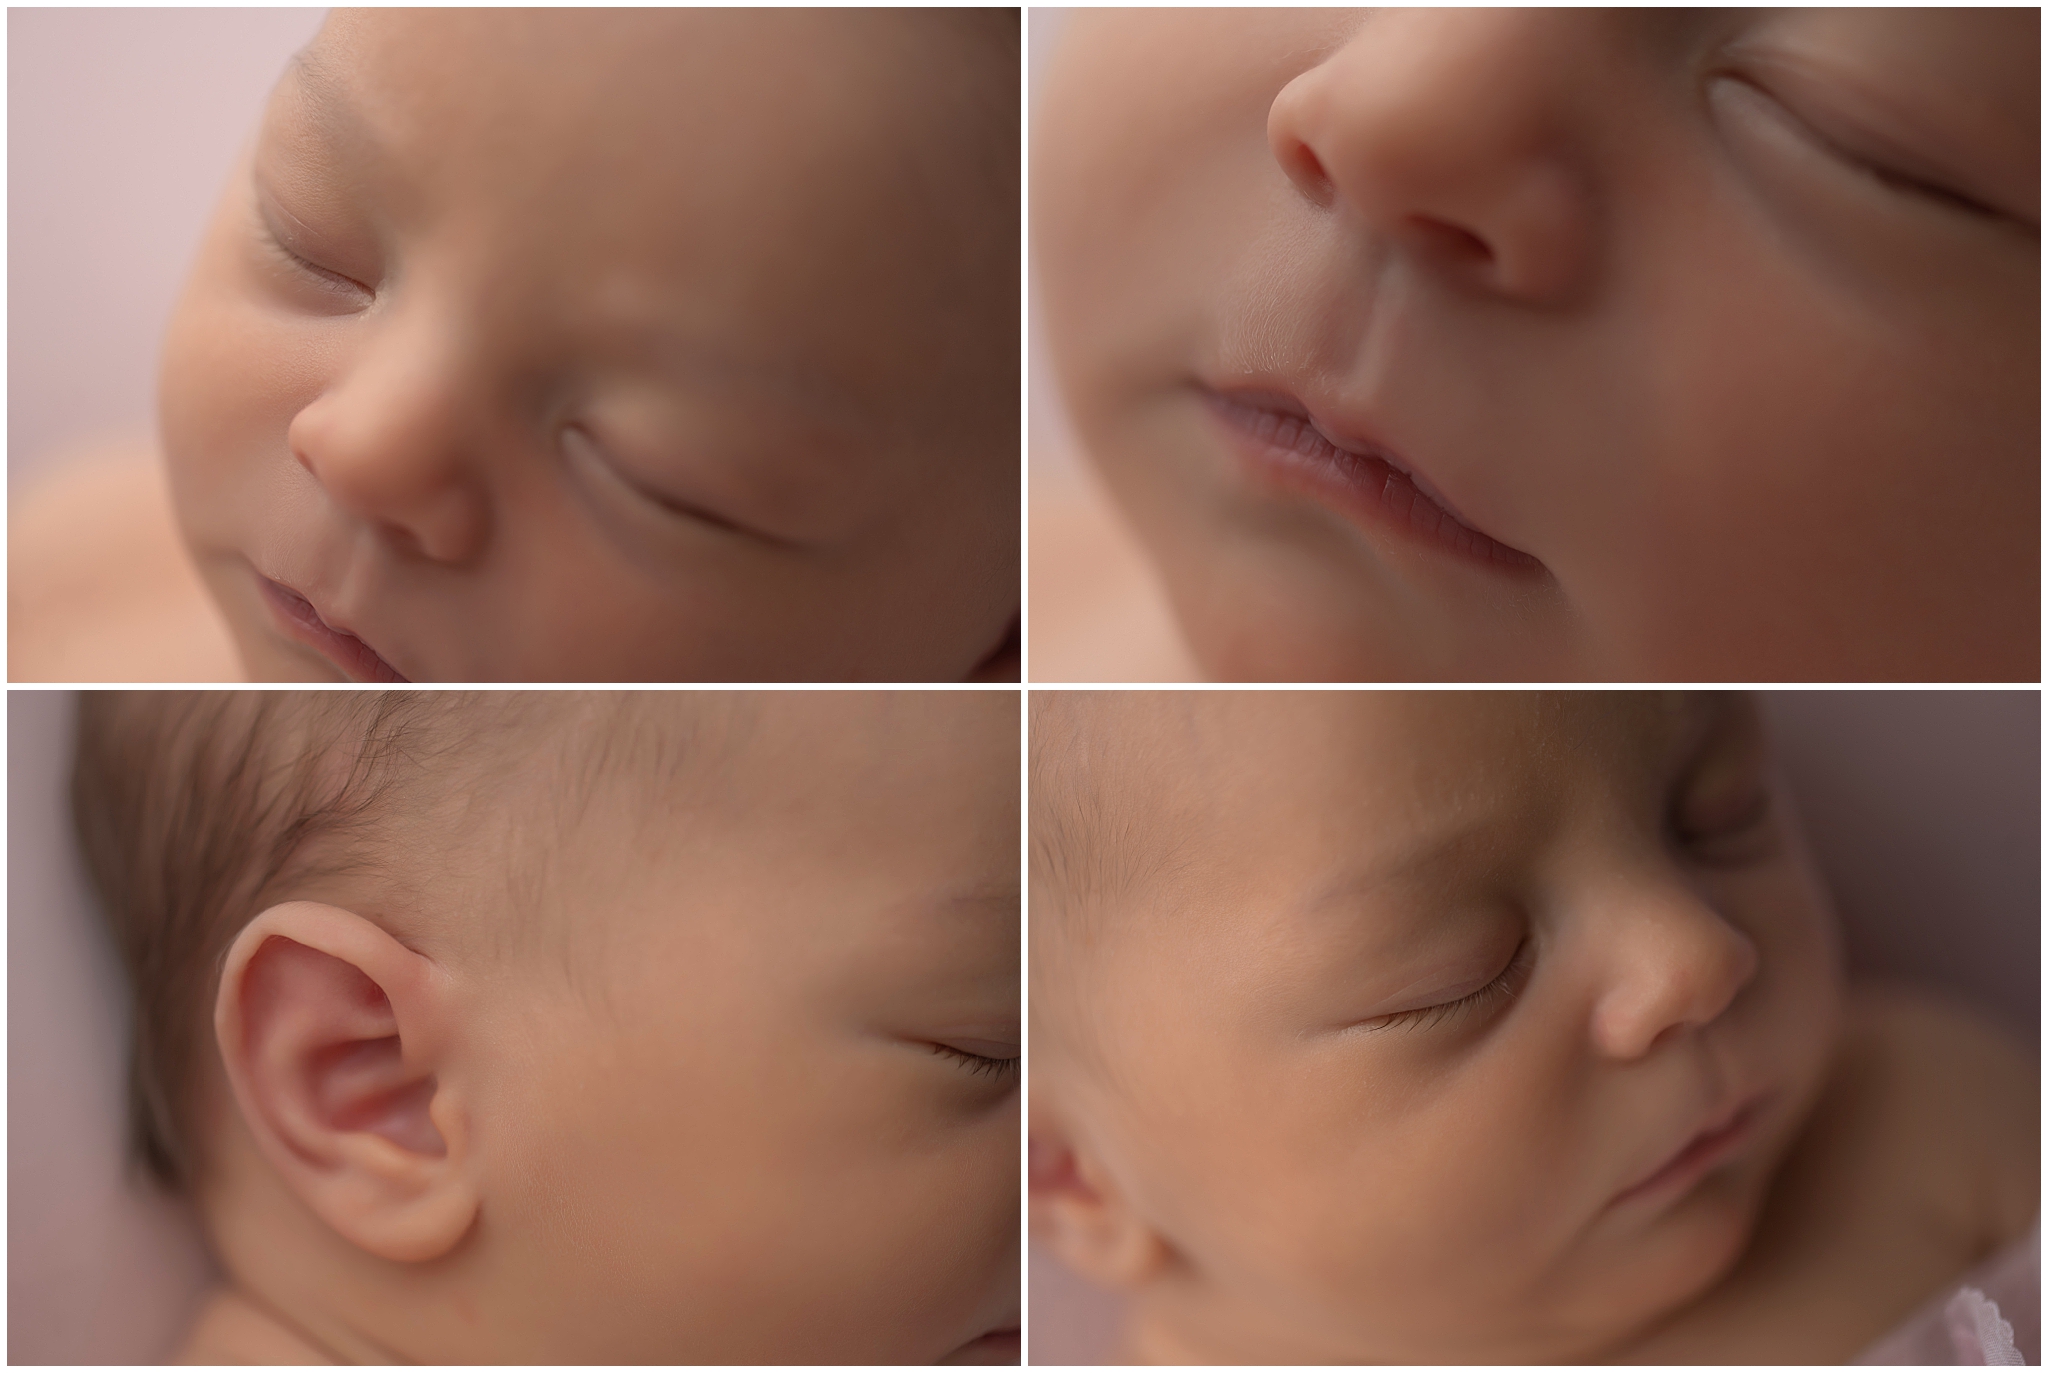 detailed images of newborn baby taken during photography session in london ontario